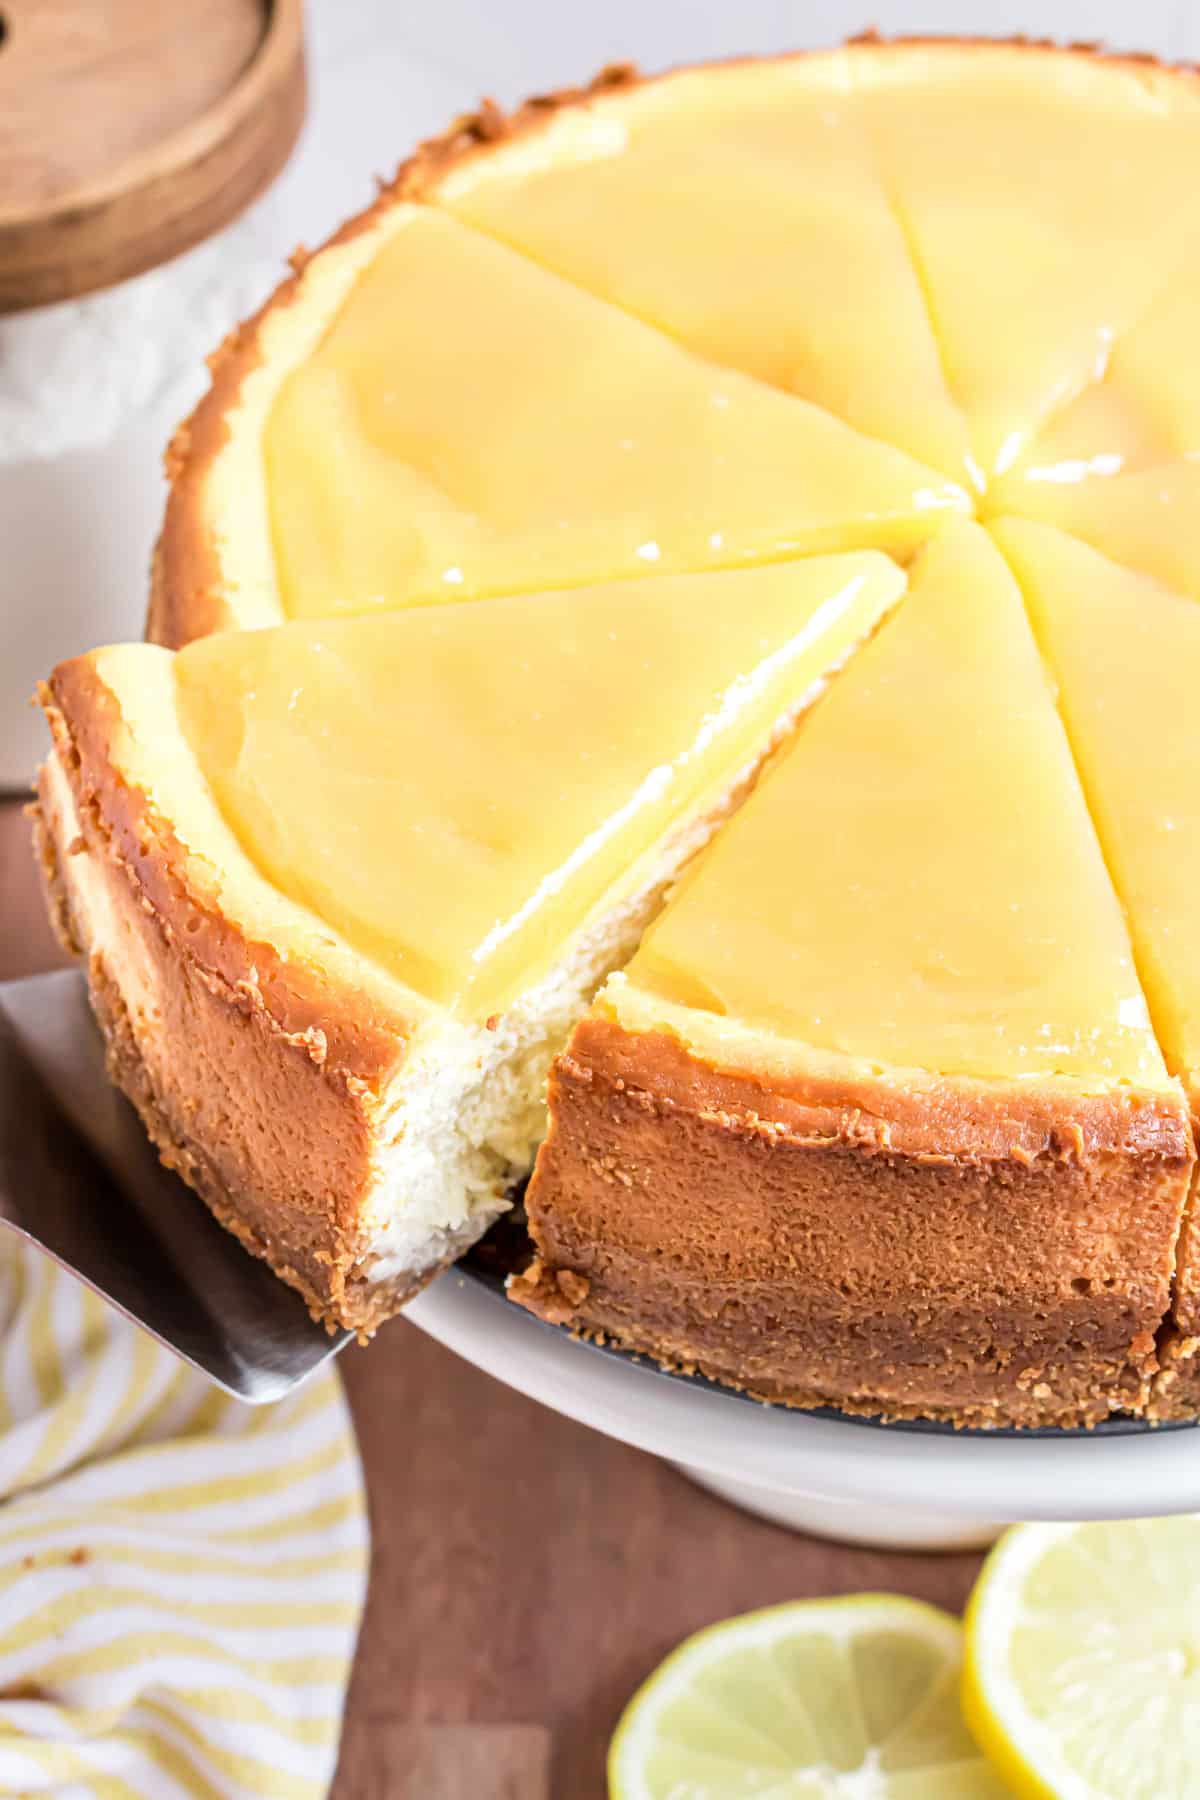 Cheesecake topped with lemon curd and cut into 8 large slices.